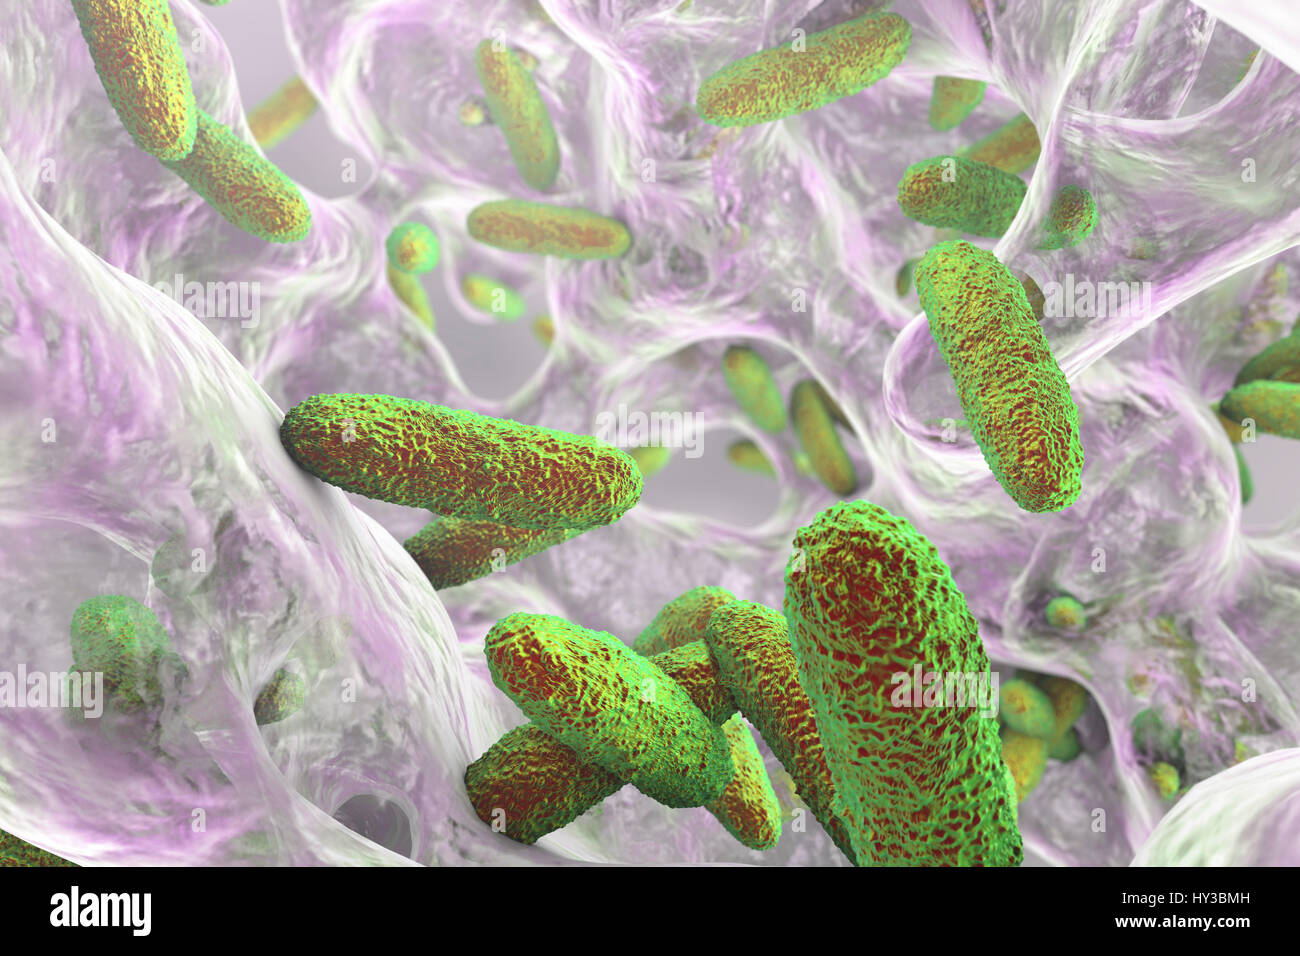 Klebsiella pneumoniae bacteria in biofilm,computer illustration.K.pneumoniae are Gram-negative,encapsulated,non-motile,enteric,rod prokaryote.This species causes Friedlander's pneumonia urinary tract infections.K.pneumoniae's pathogenicity can be attributed to its production of heat-stable Stock Photo